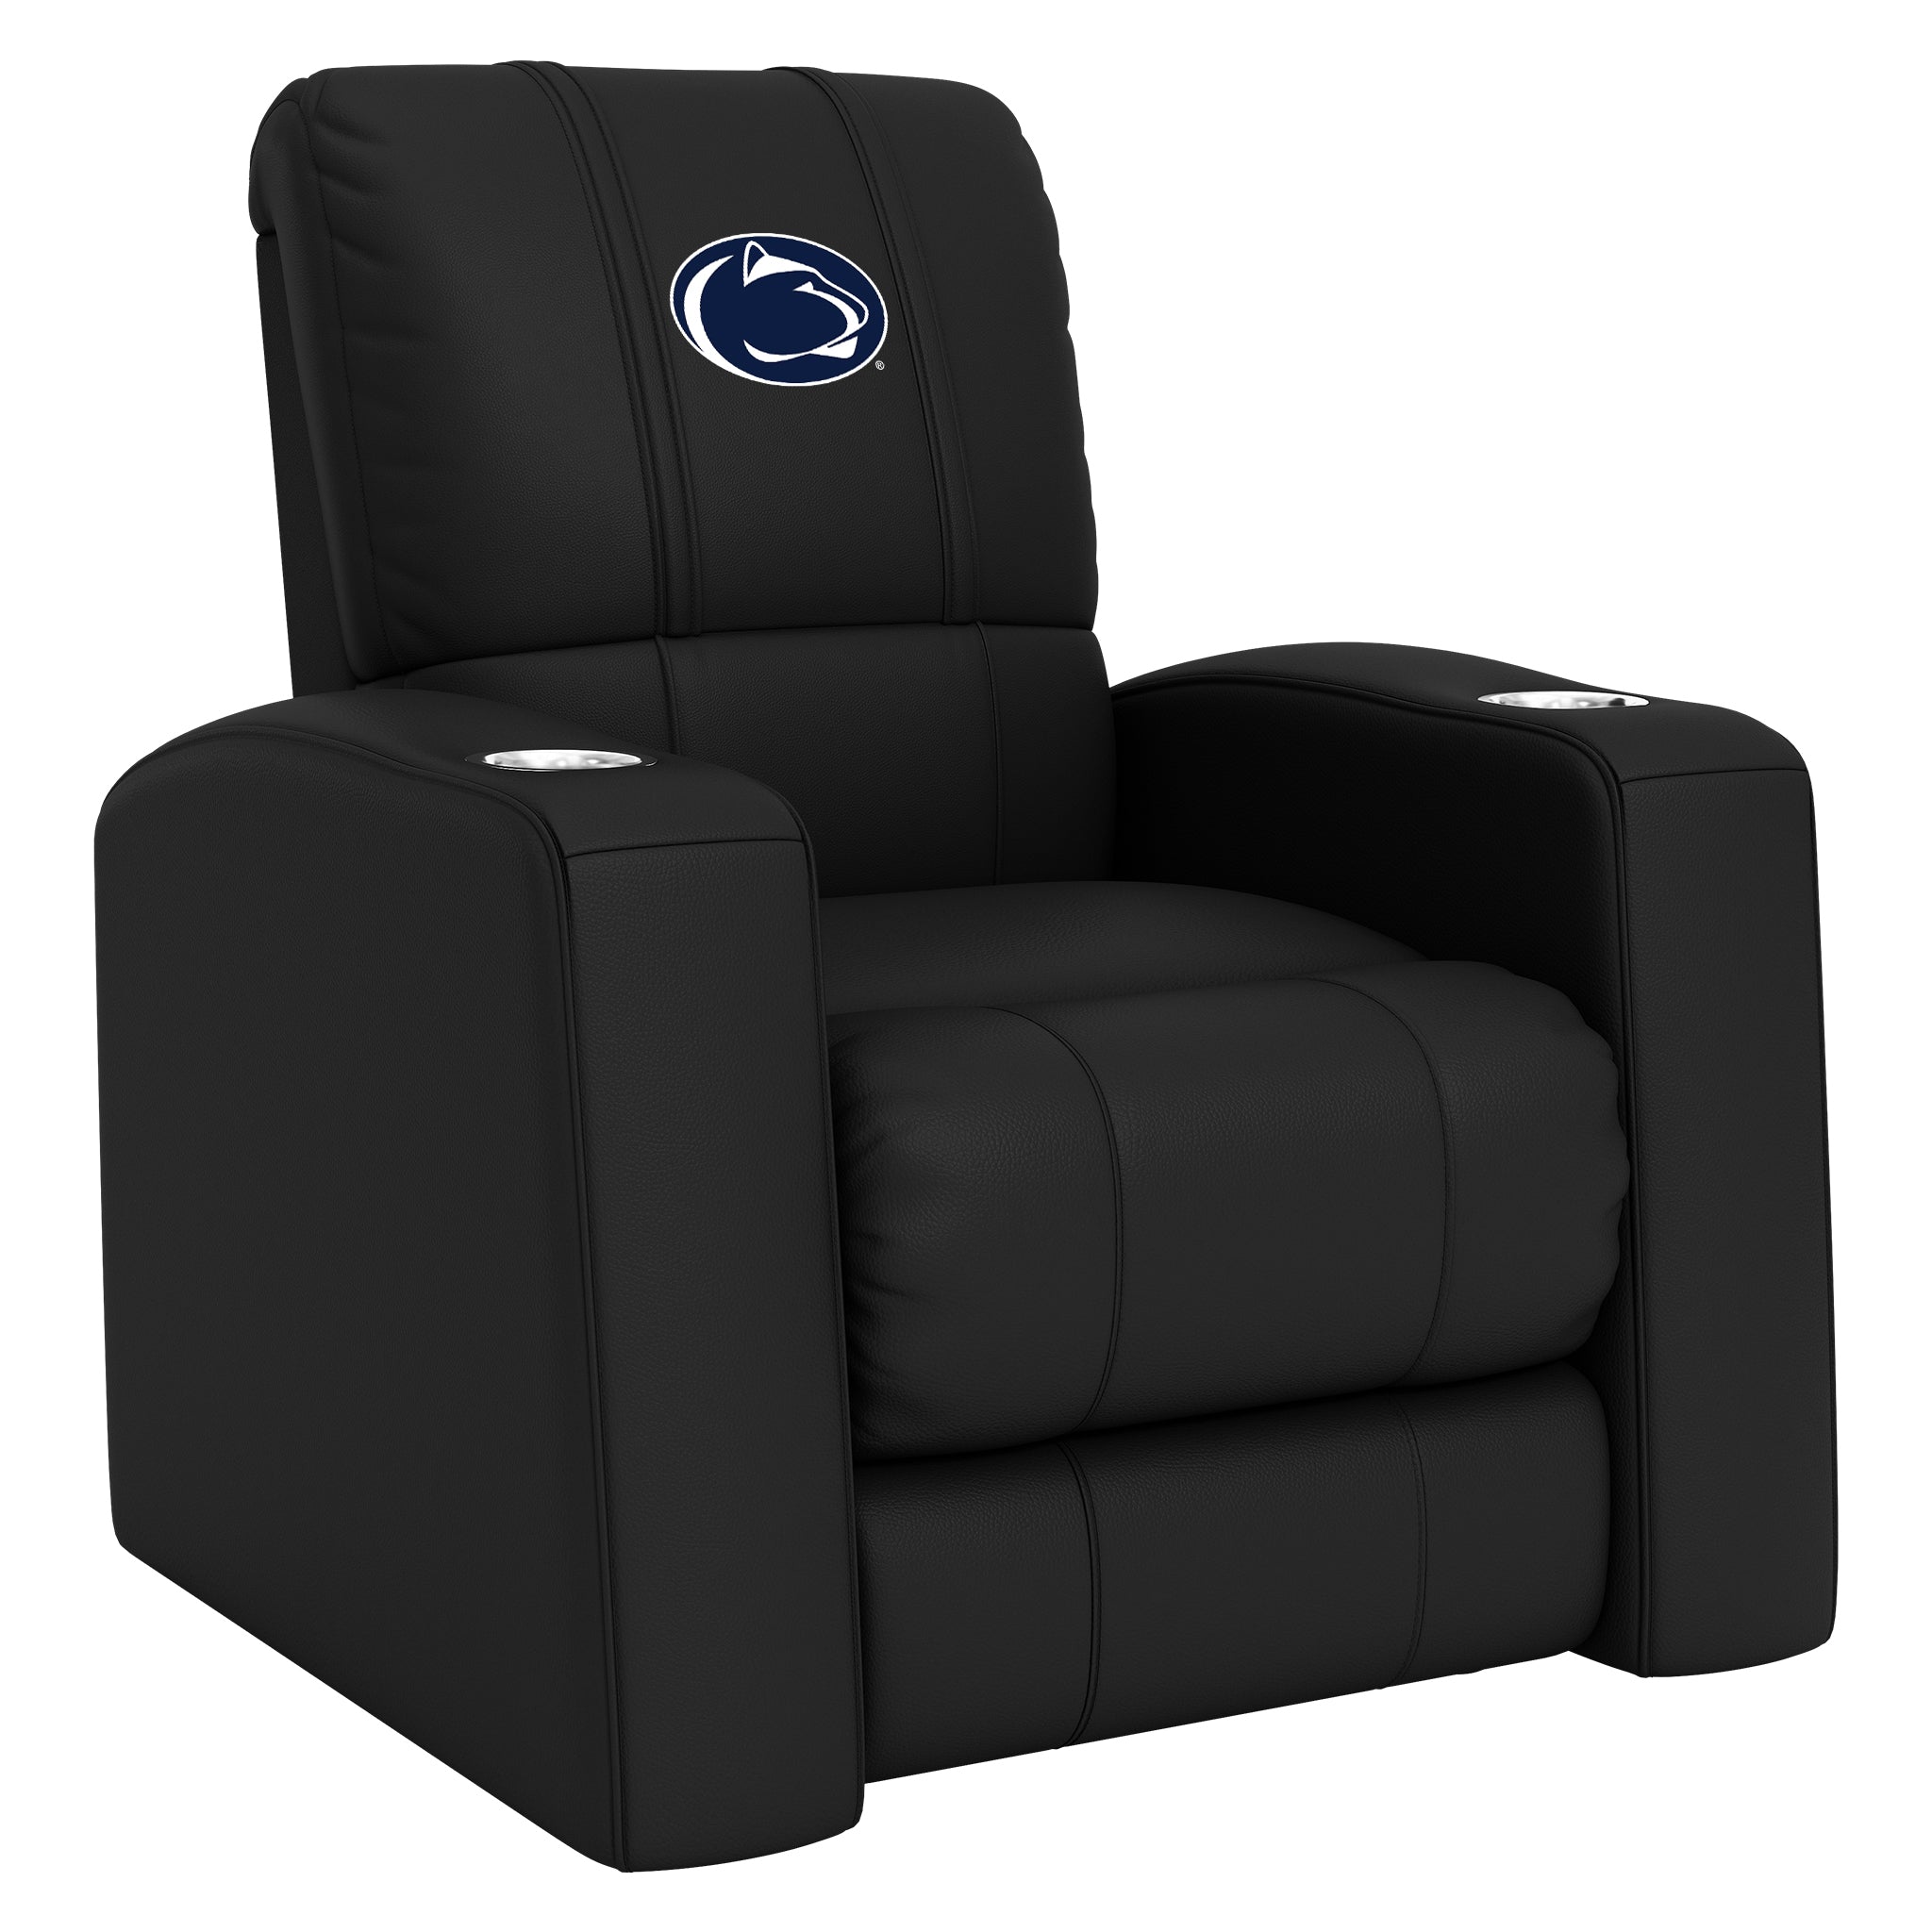 Penn State Nittany Lions Home Theater Recliner with Penn State Nittany Lions Logo